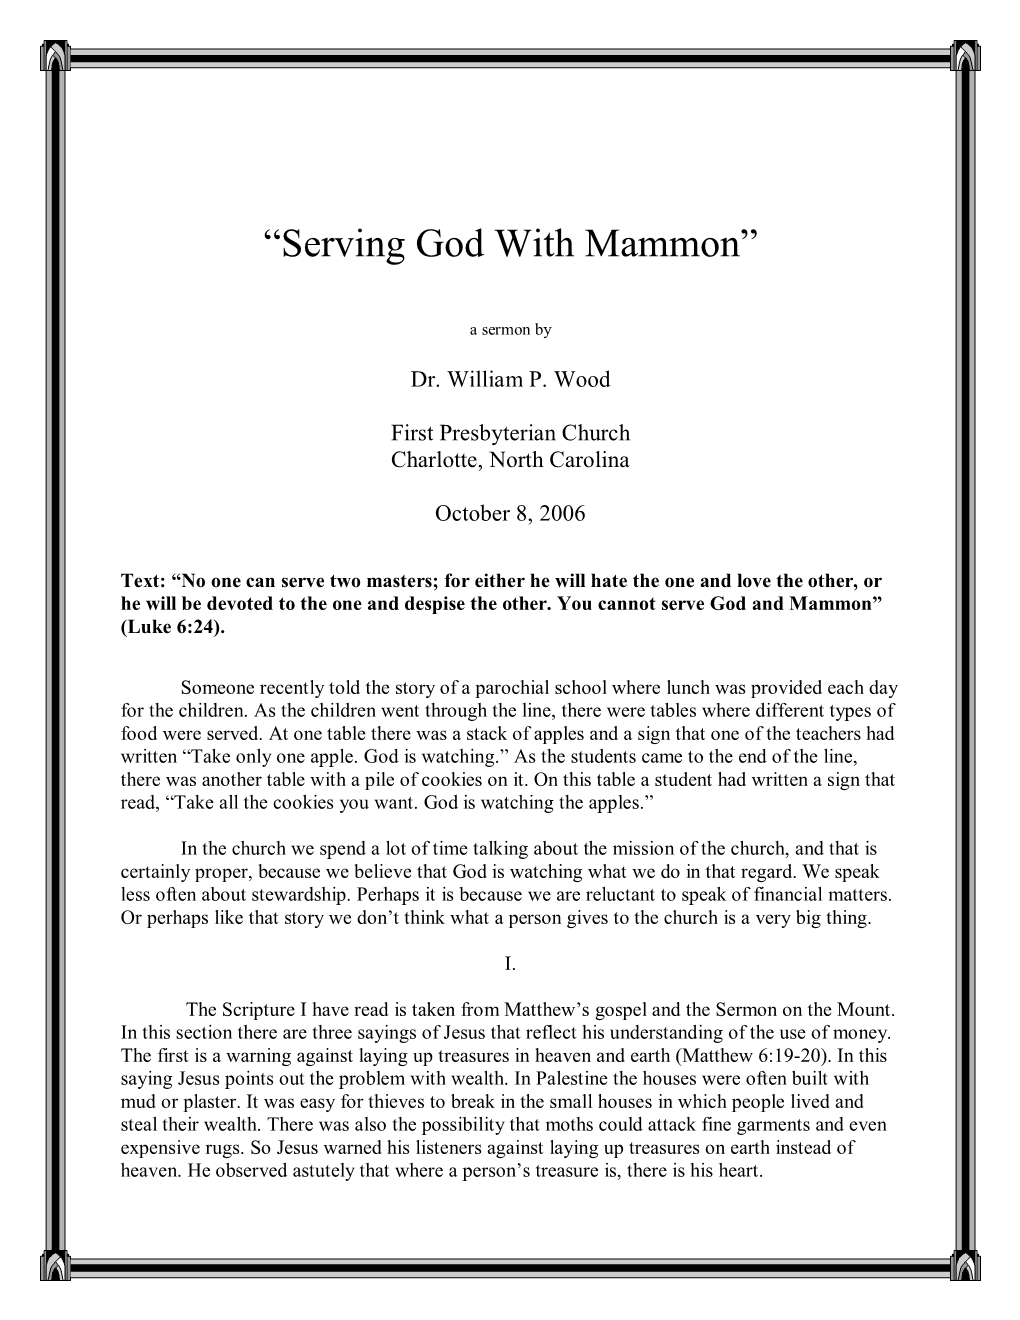 “Serving God with Mammon”